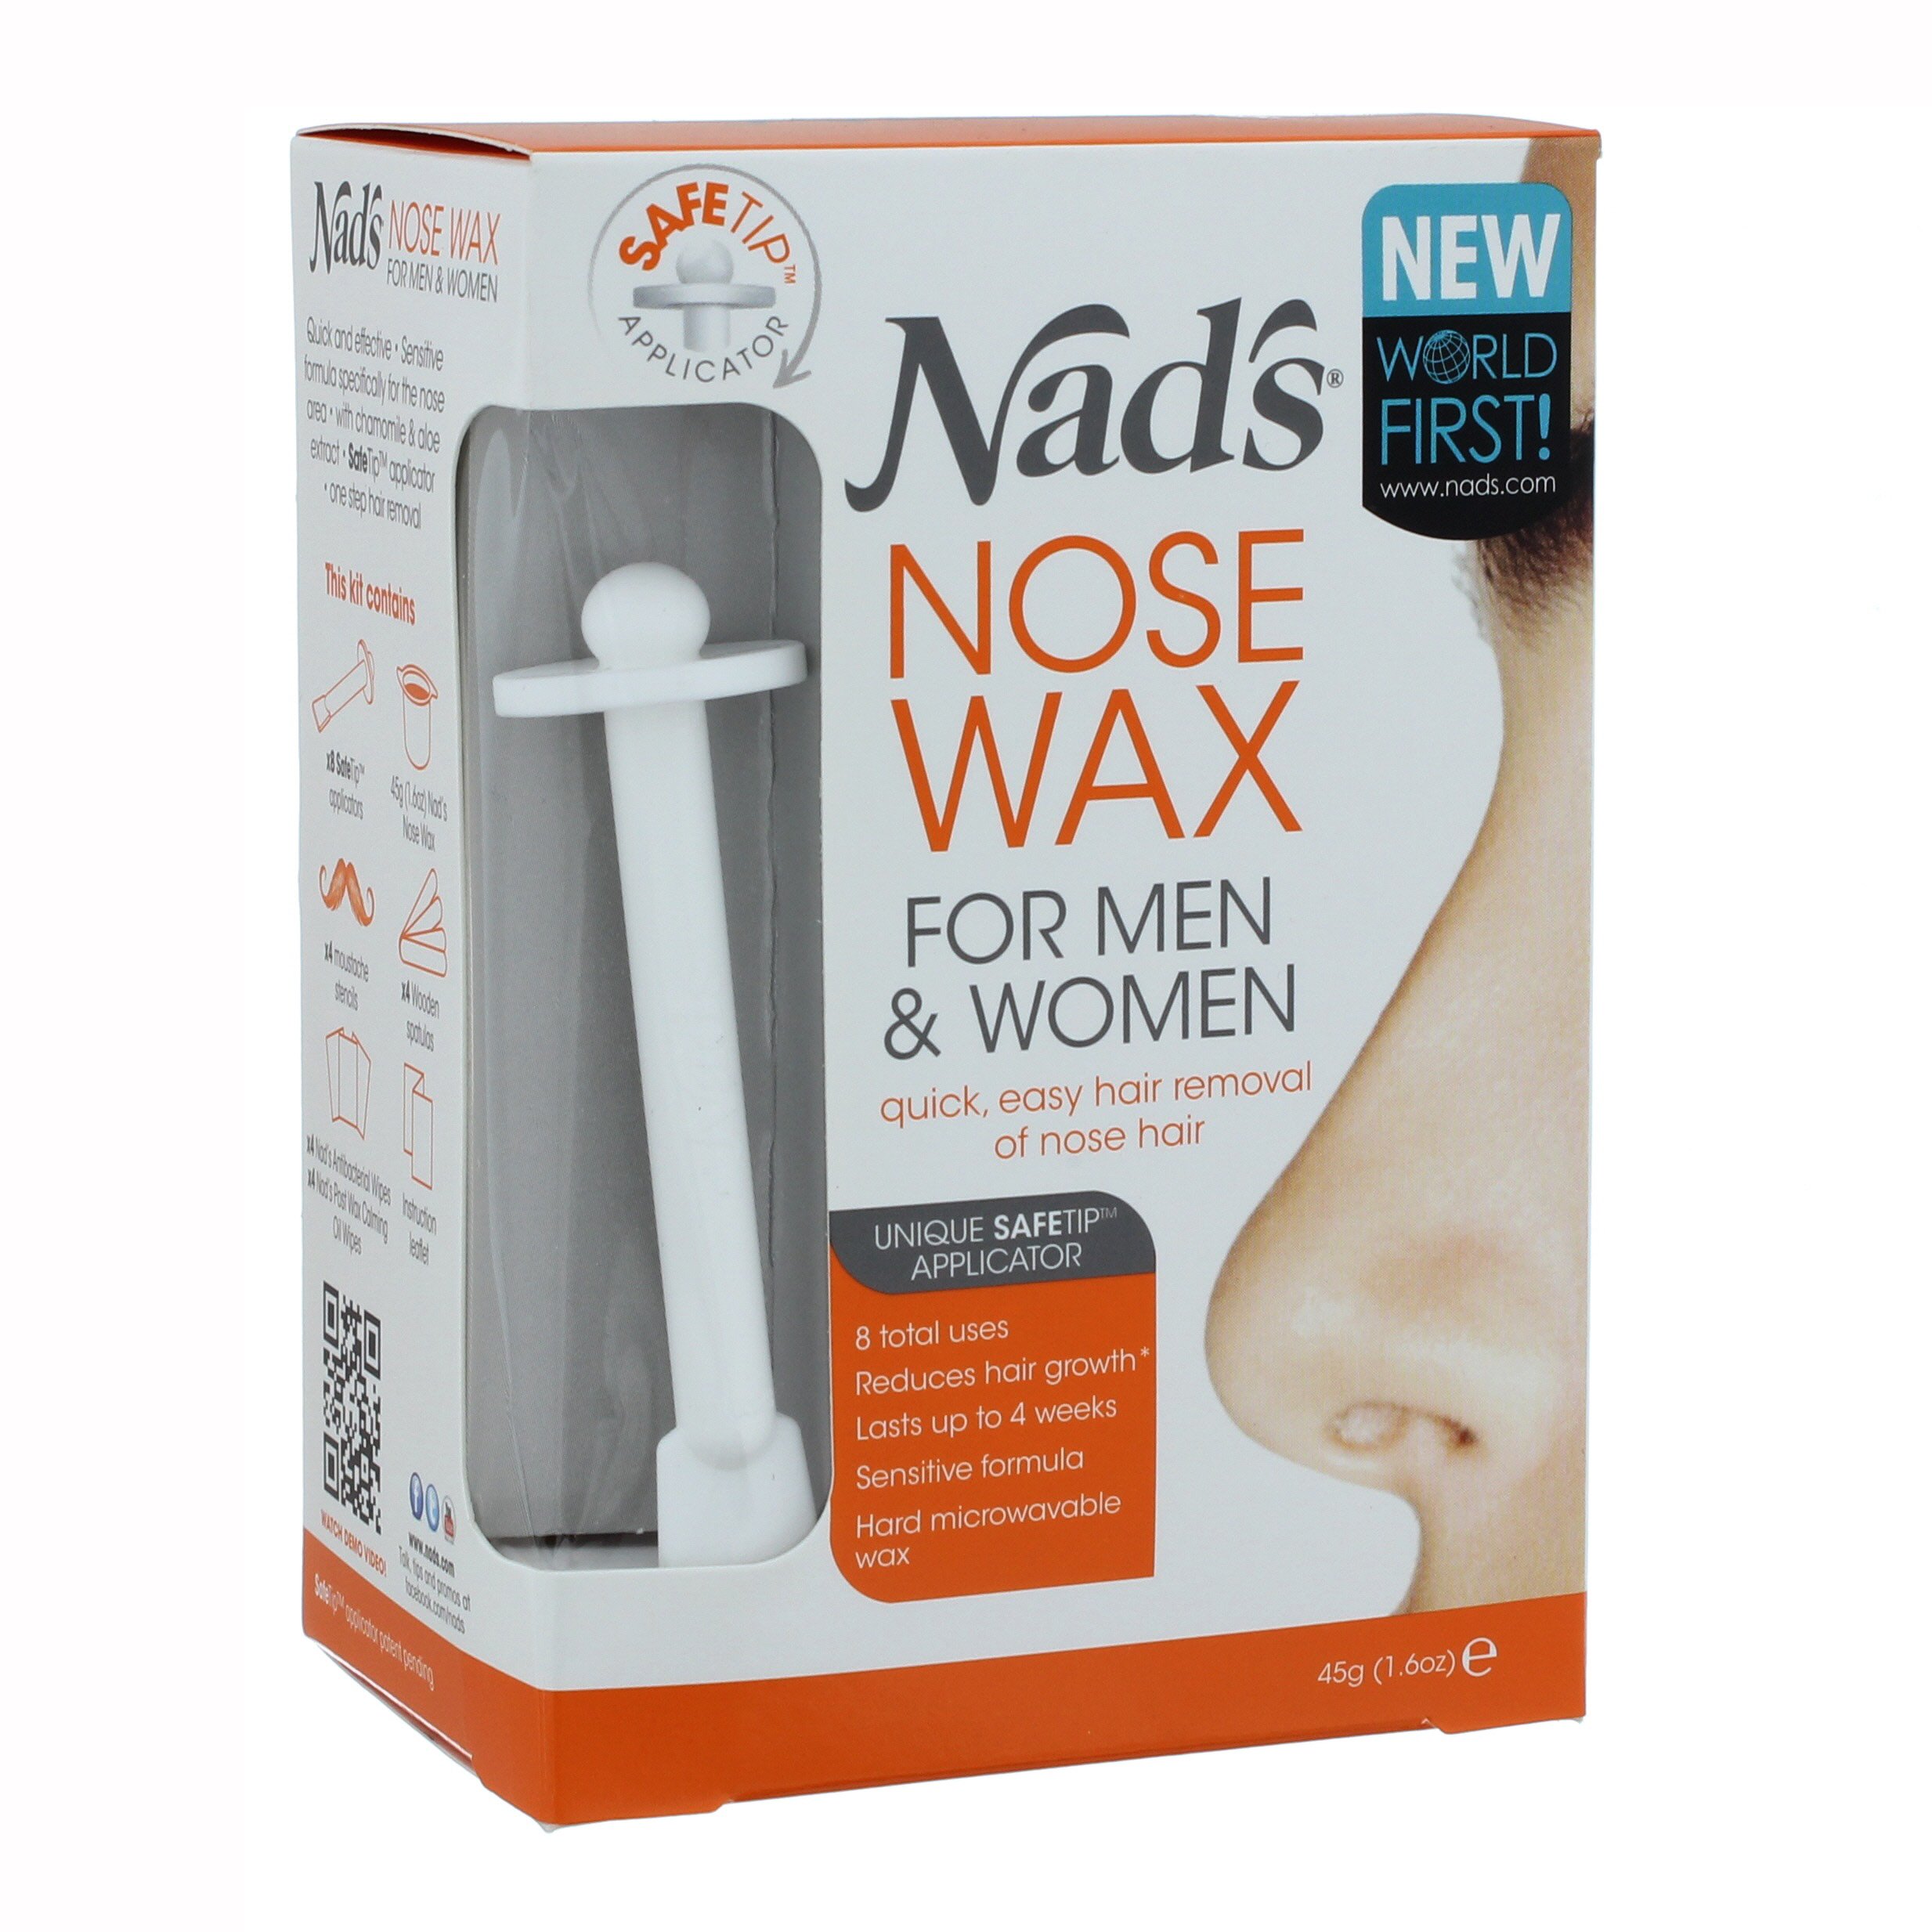 Nose Wax Kit Nose Waxing Hair Wax Removal for Men Women Nose Hair